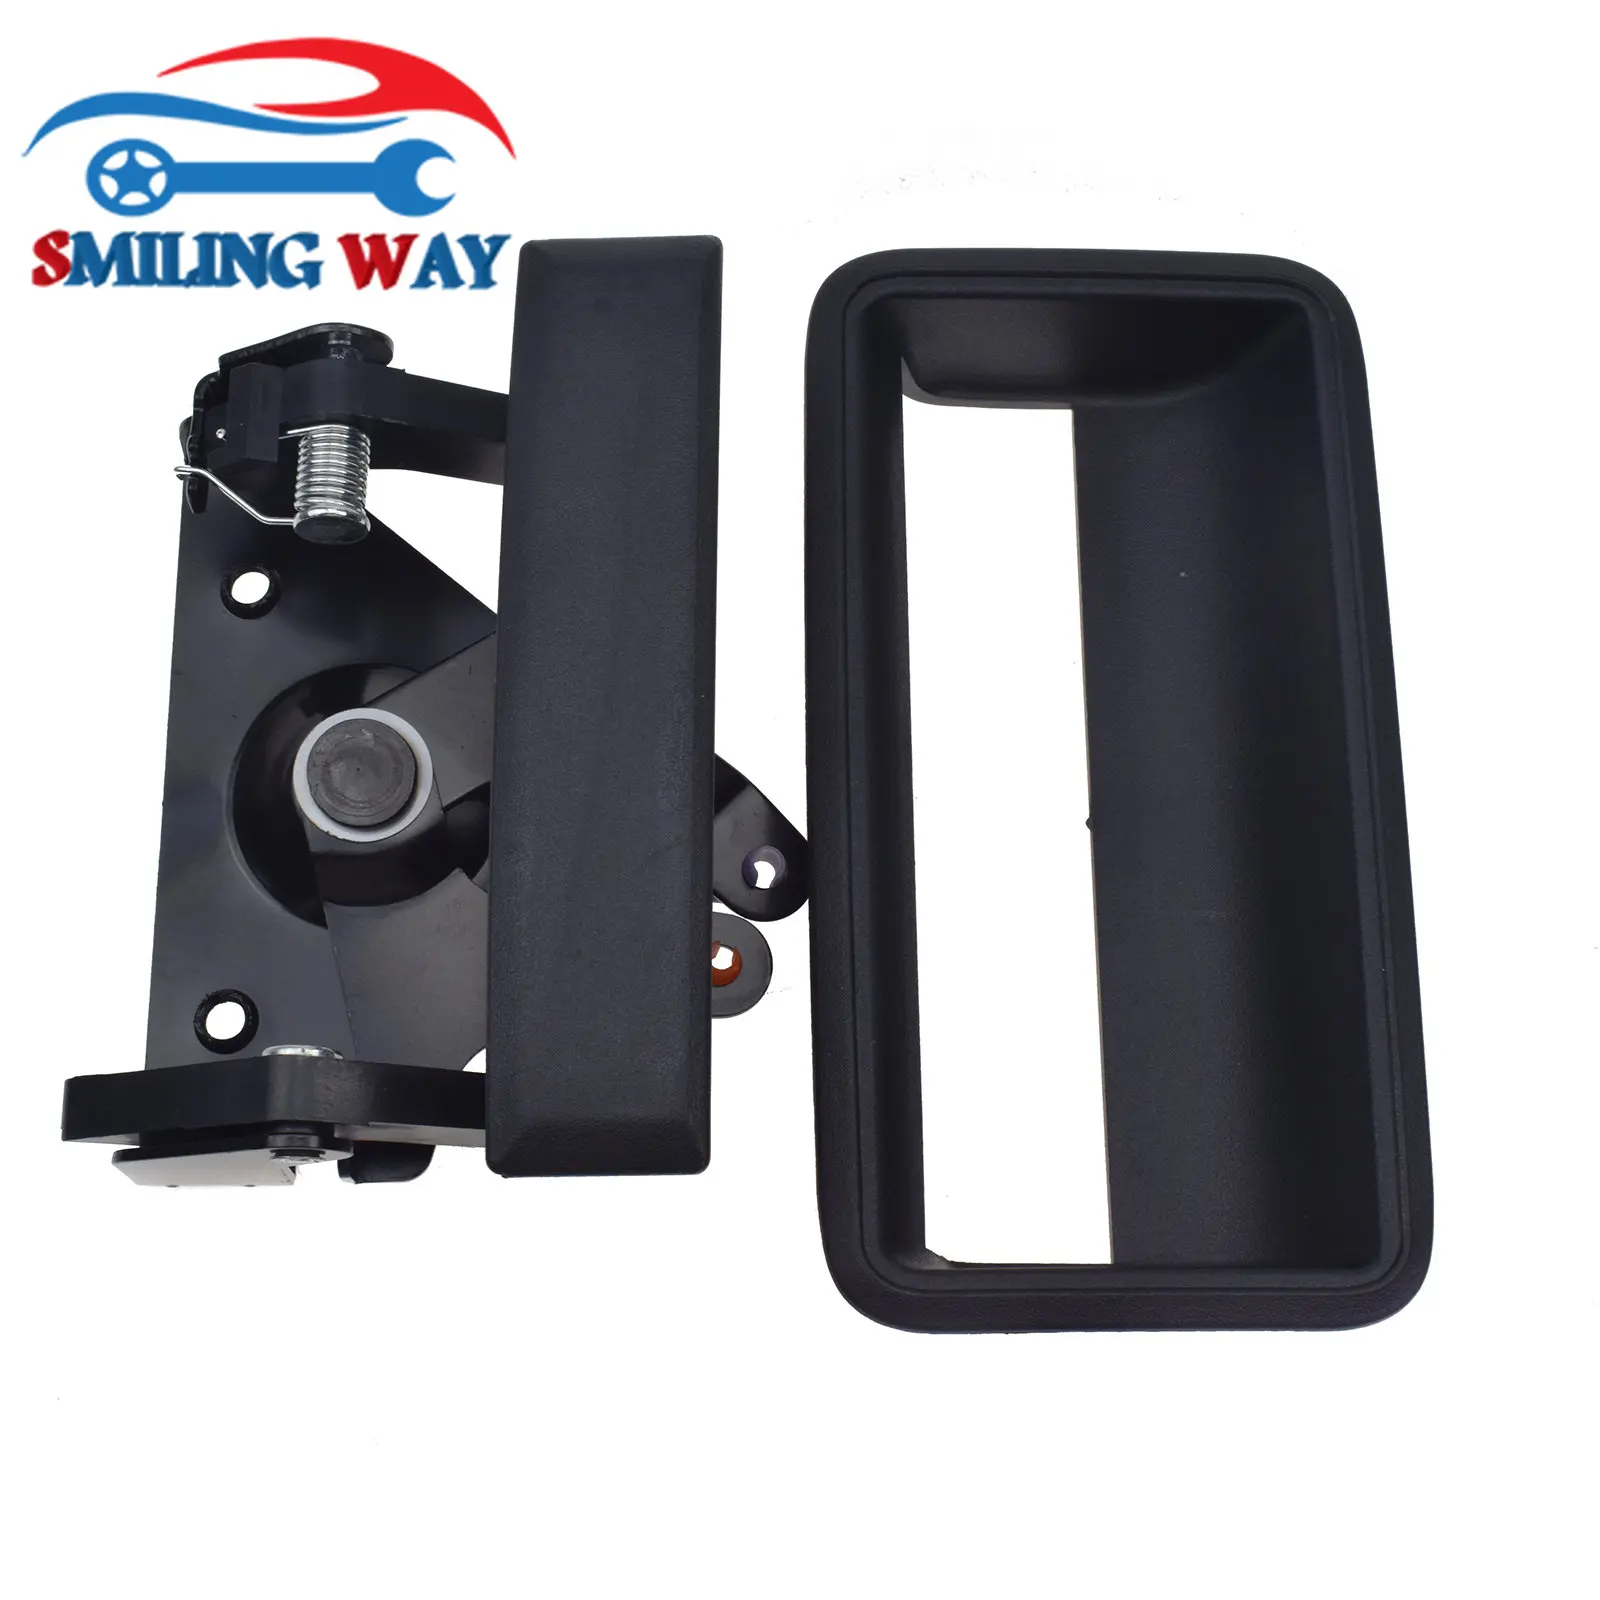 Exterior Tailgate Handle Latch Compatible with Chevy GMC C/K C1500 C2500  C3500 K1500 K2500 K3500 Pickup Truck 1988 1989 1990 1991 1992 1993 1994  1995